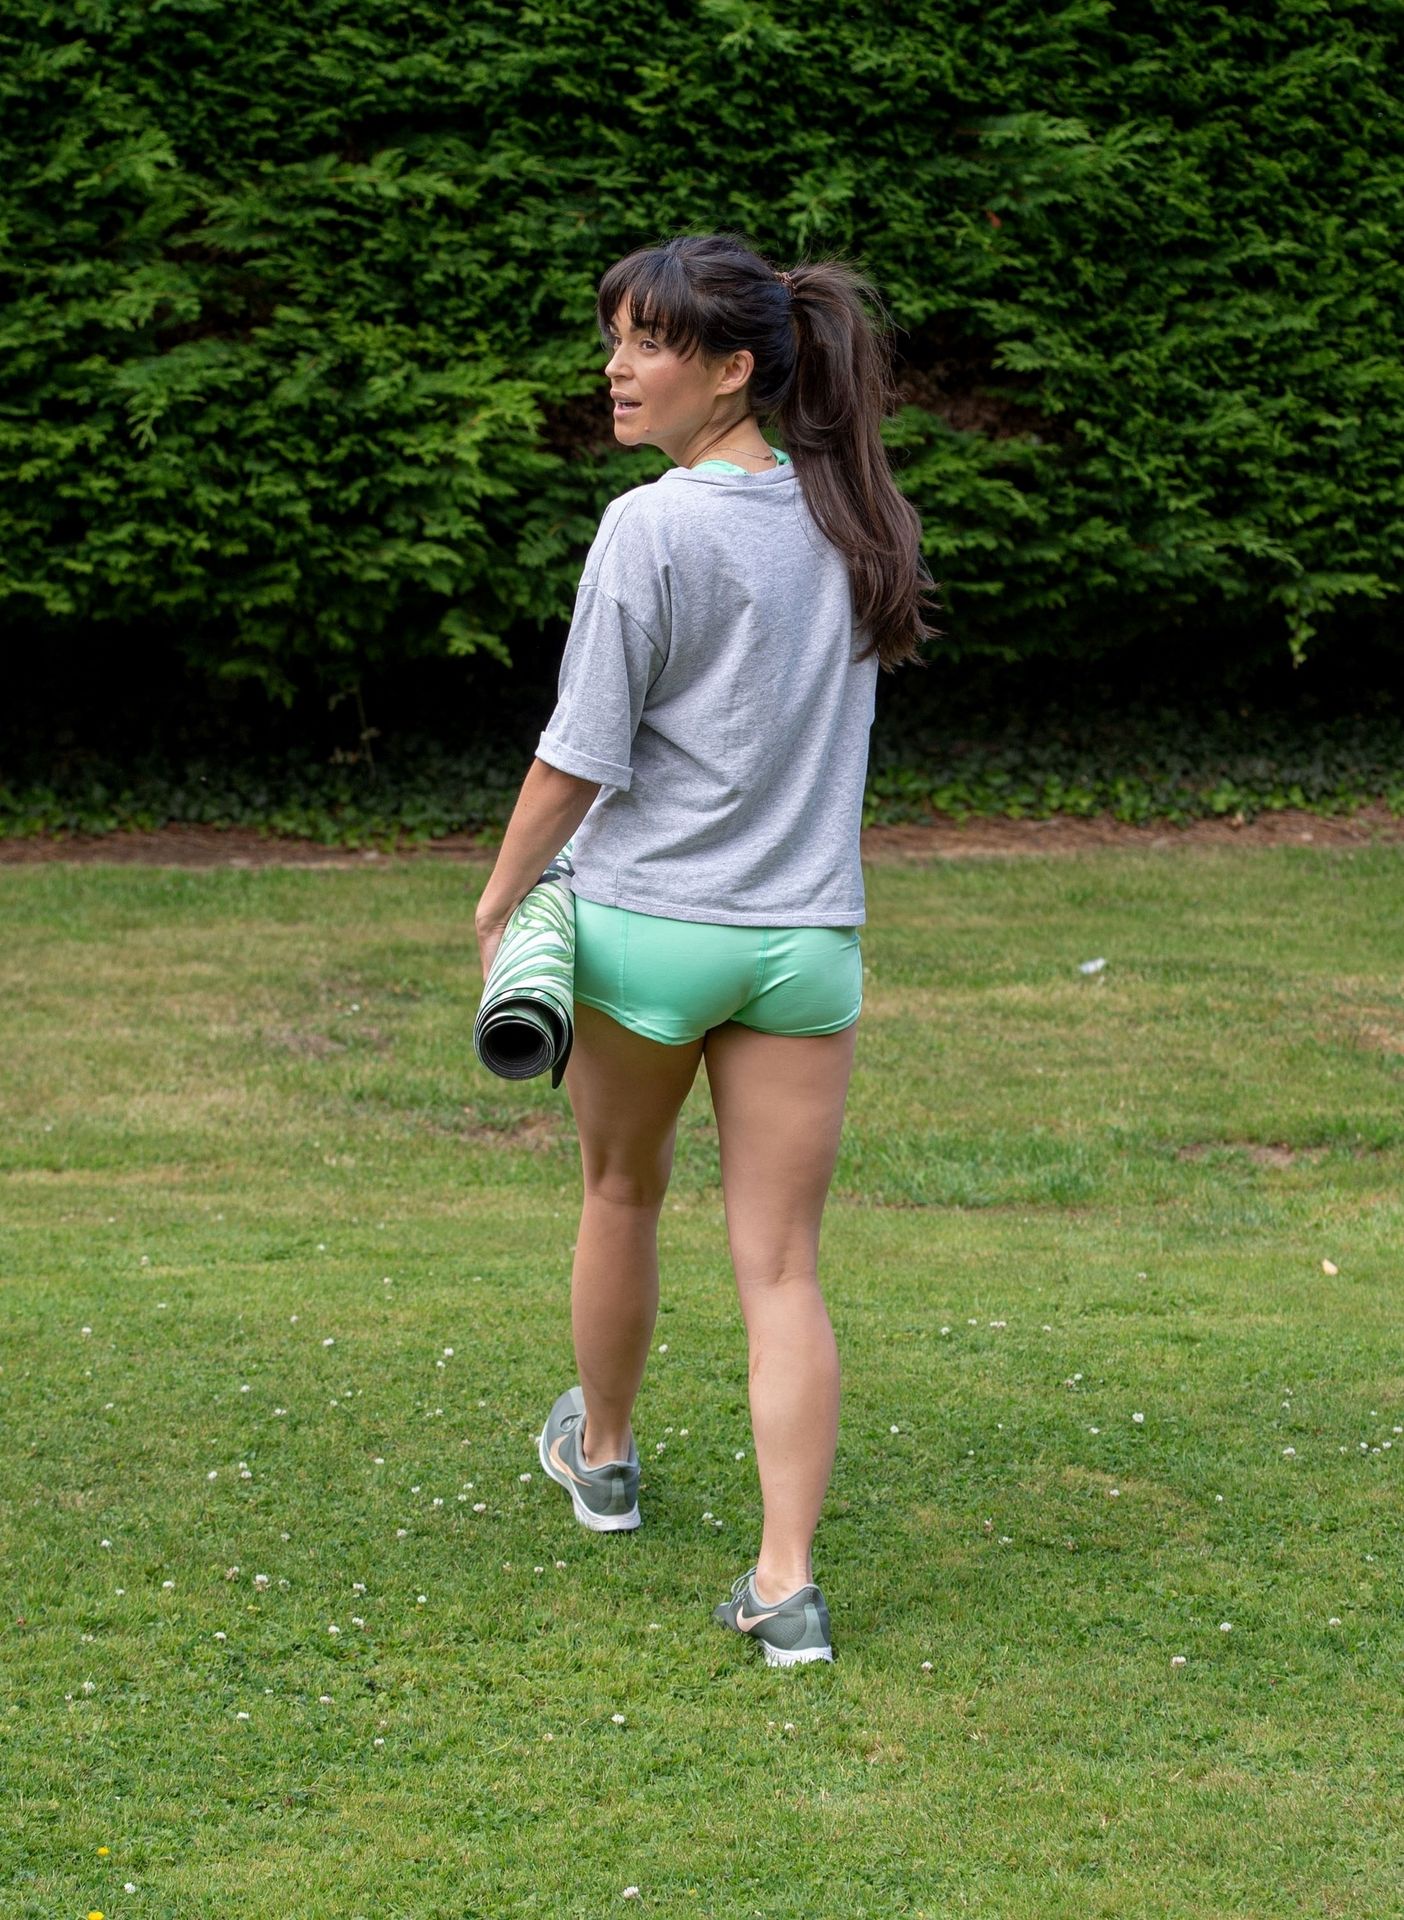 Casey Batchelor Shows Off Her Impressive Yoga Moves in North London (12 Photos)